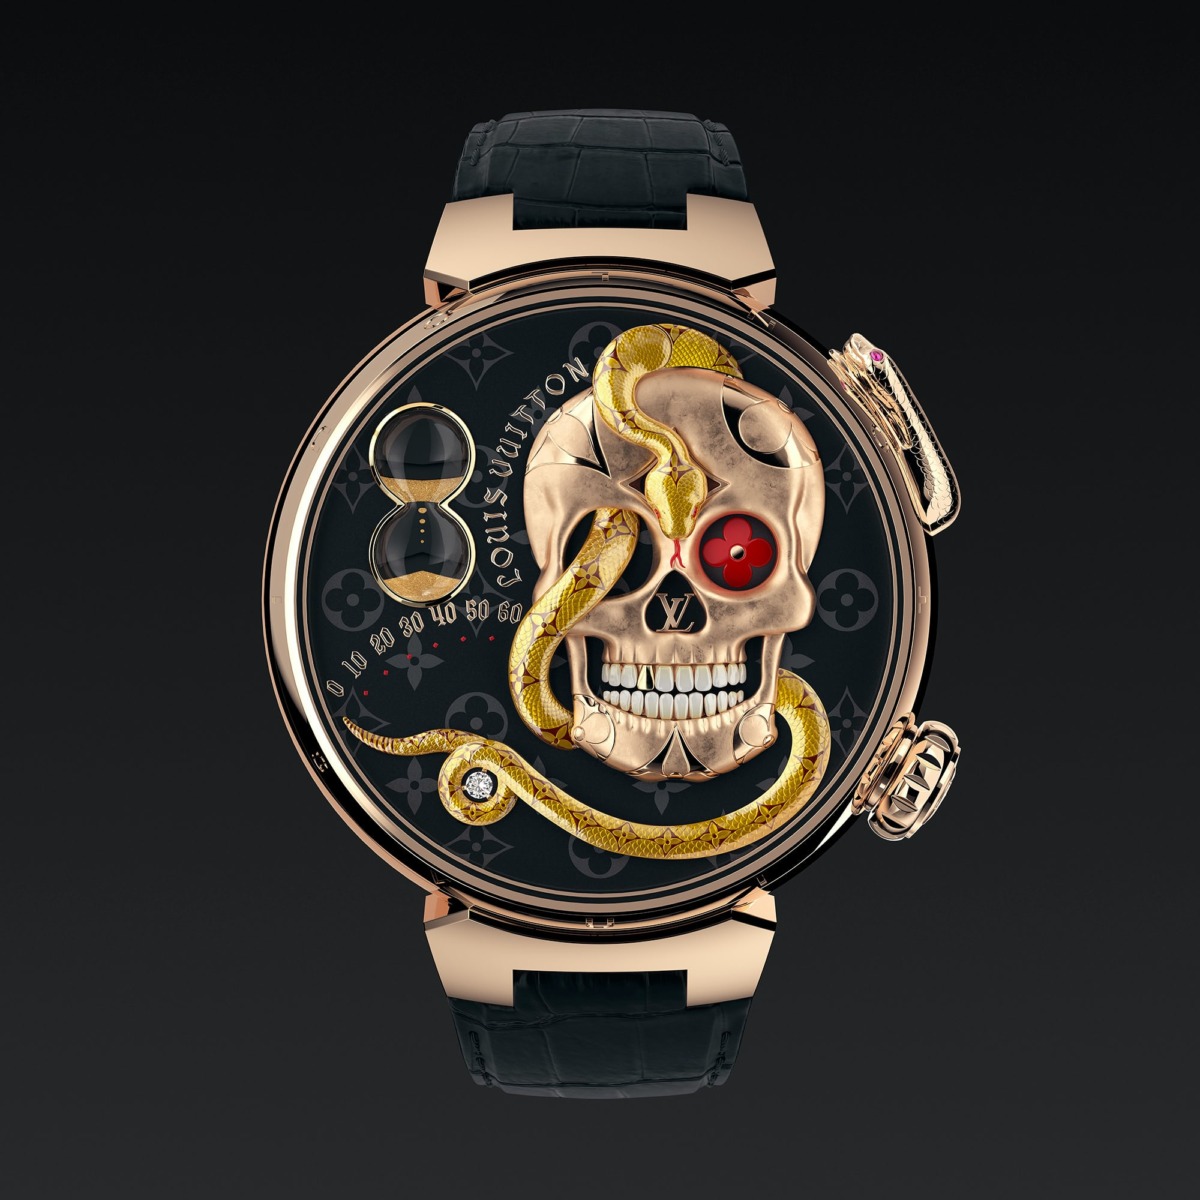 TAMBOUR MINUTE REPEATER by Louis Vuitton